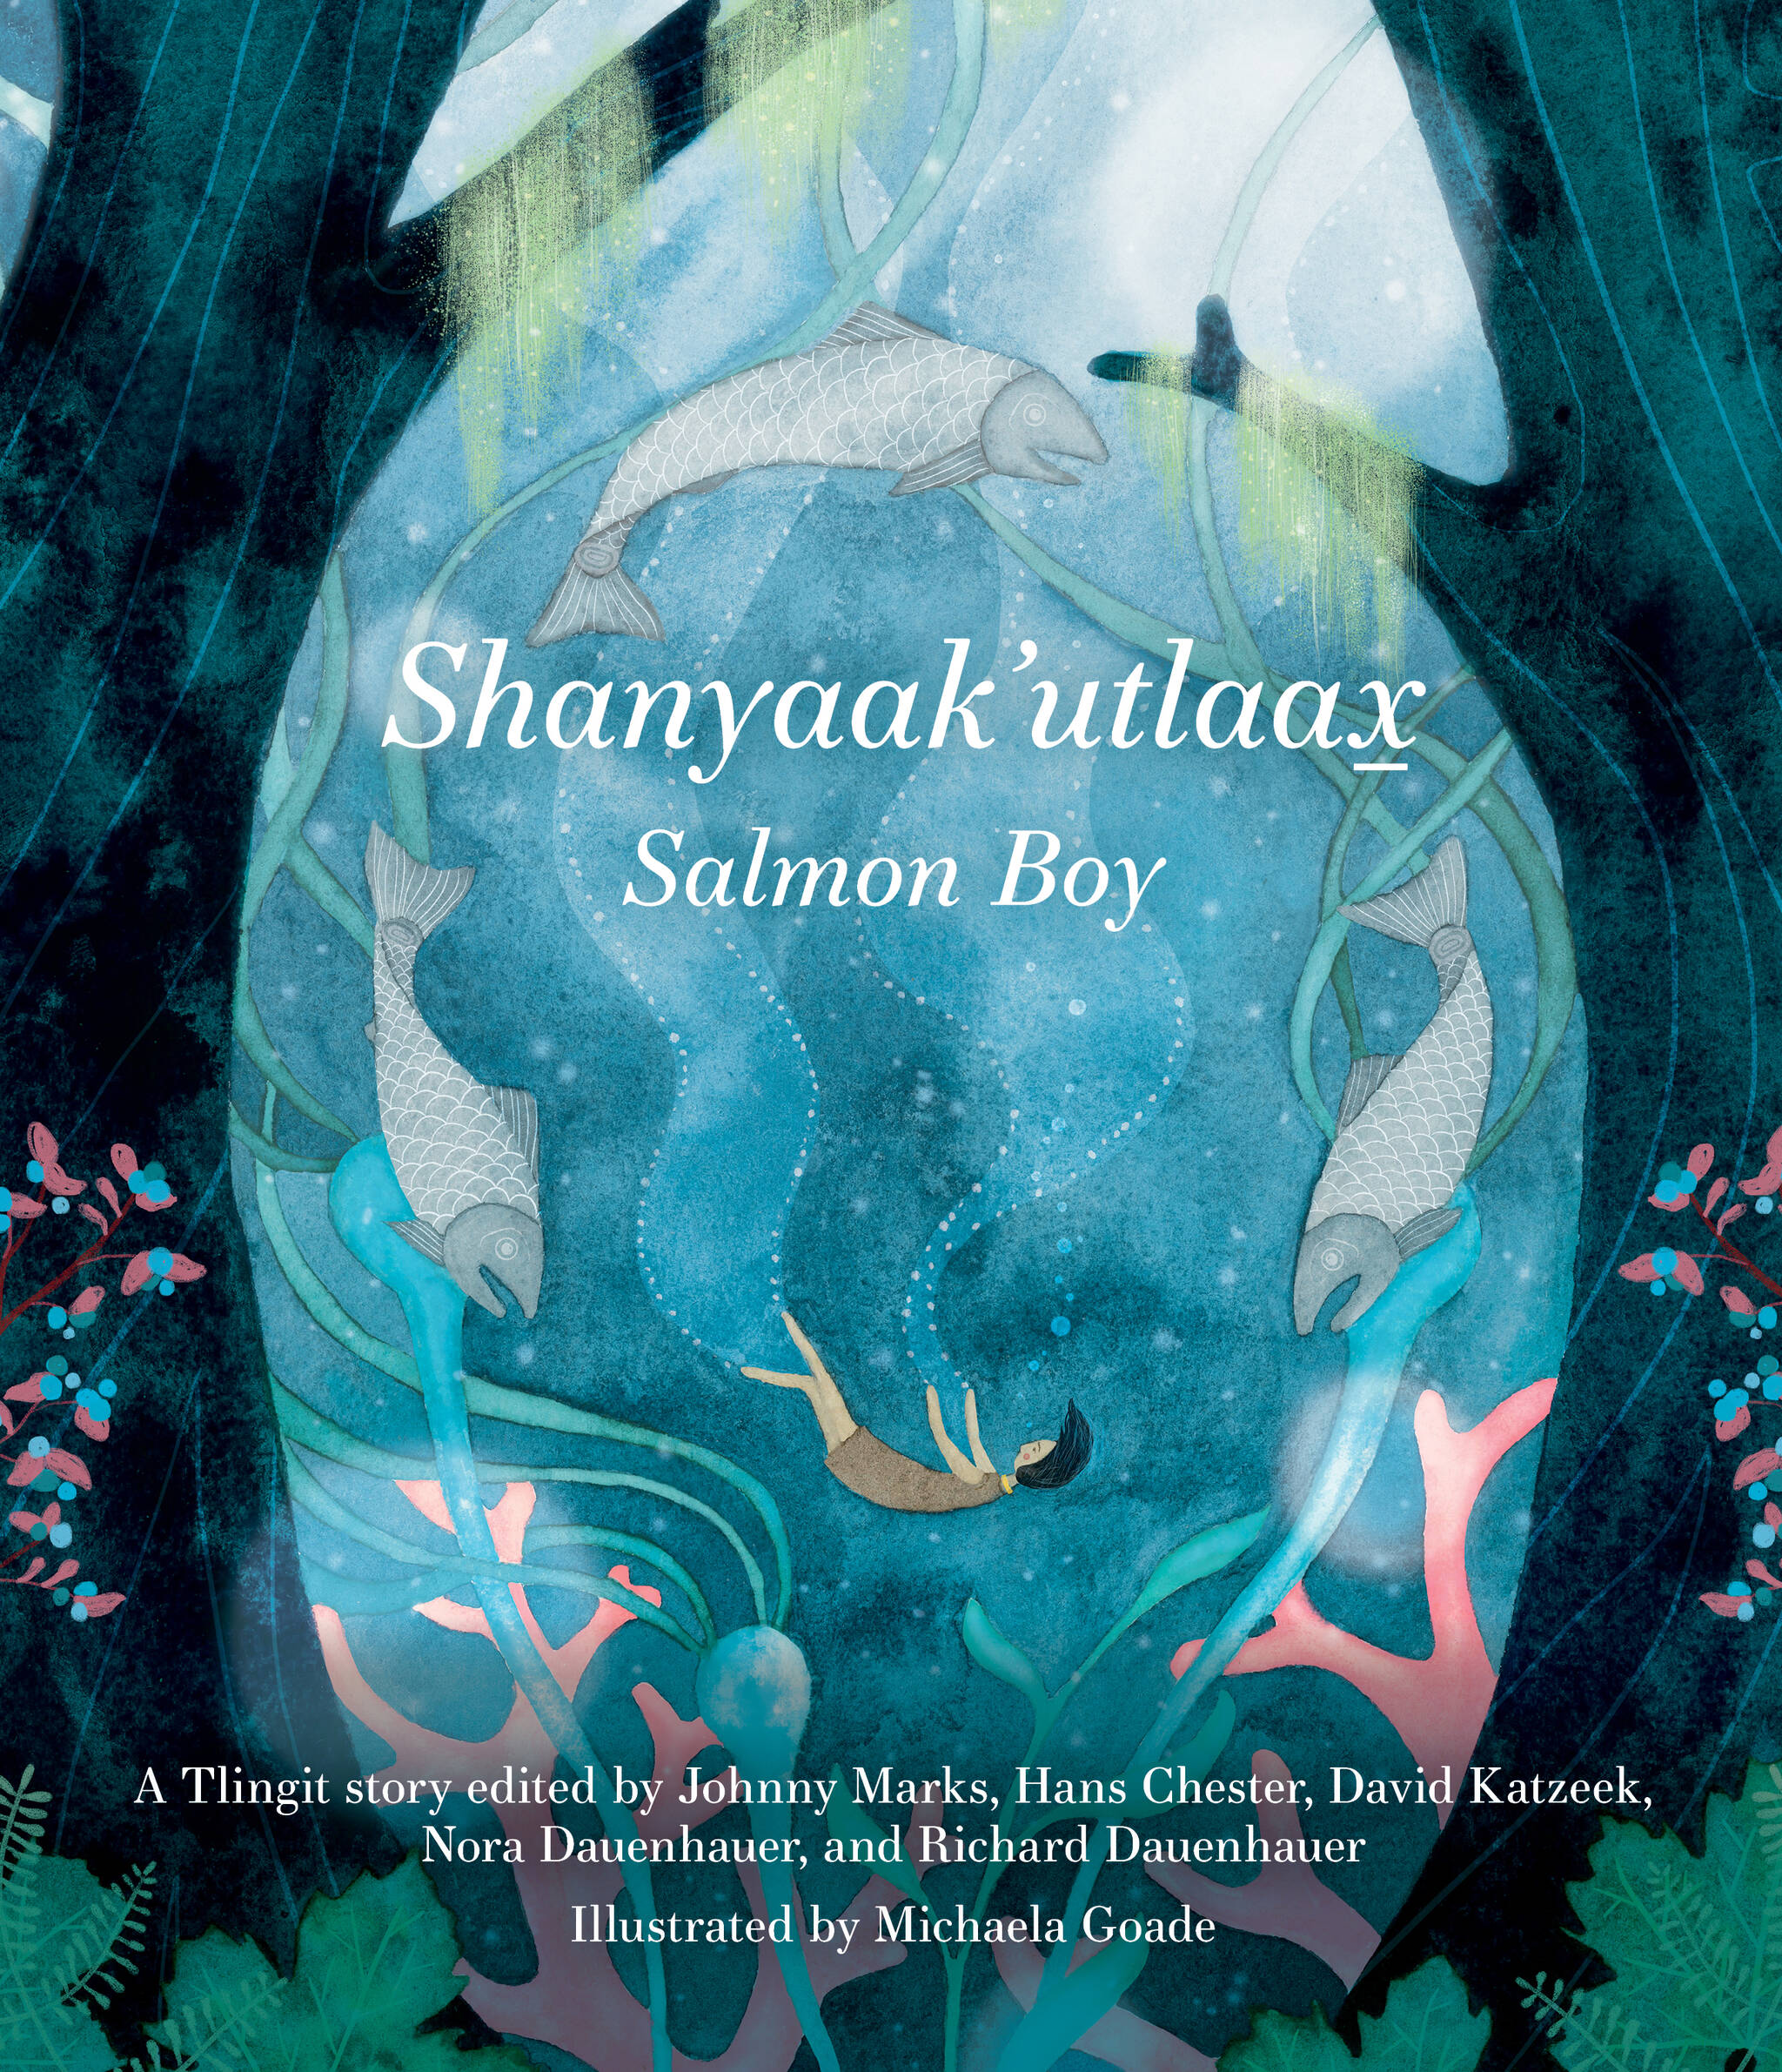 The Baby Raven Reads-published book Shanyaak’utlaax̱ – Salmon Boy will represent Alaska at the 2021 National Book Festival, held by the Library of Congress. (Courtesy art / Sealaska Heritage Institute)